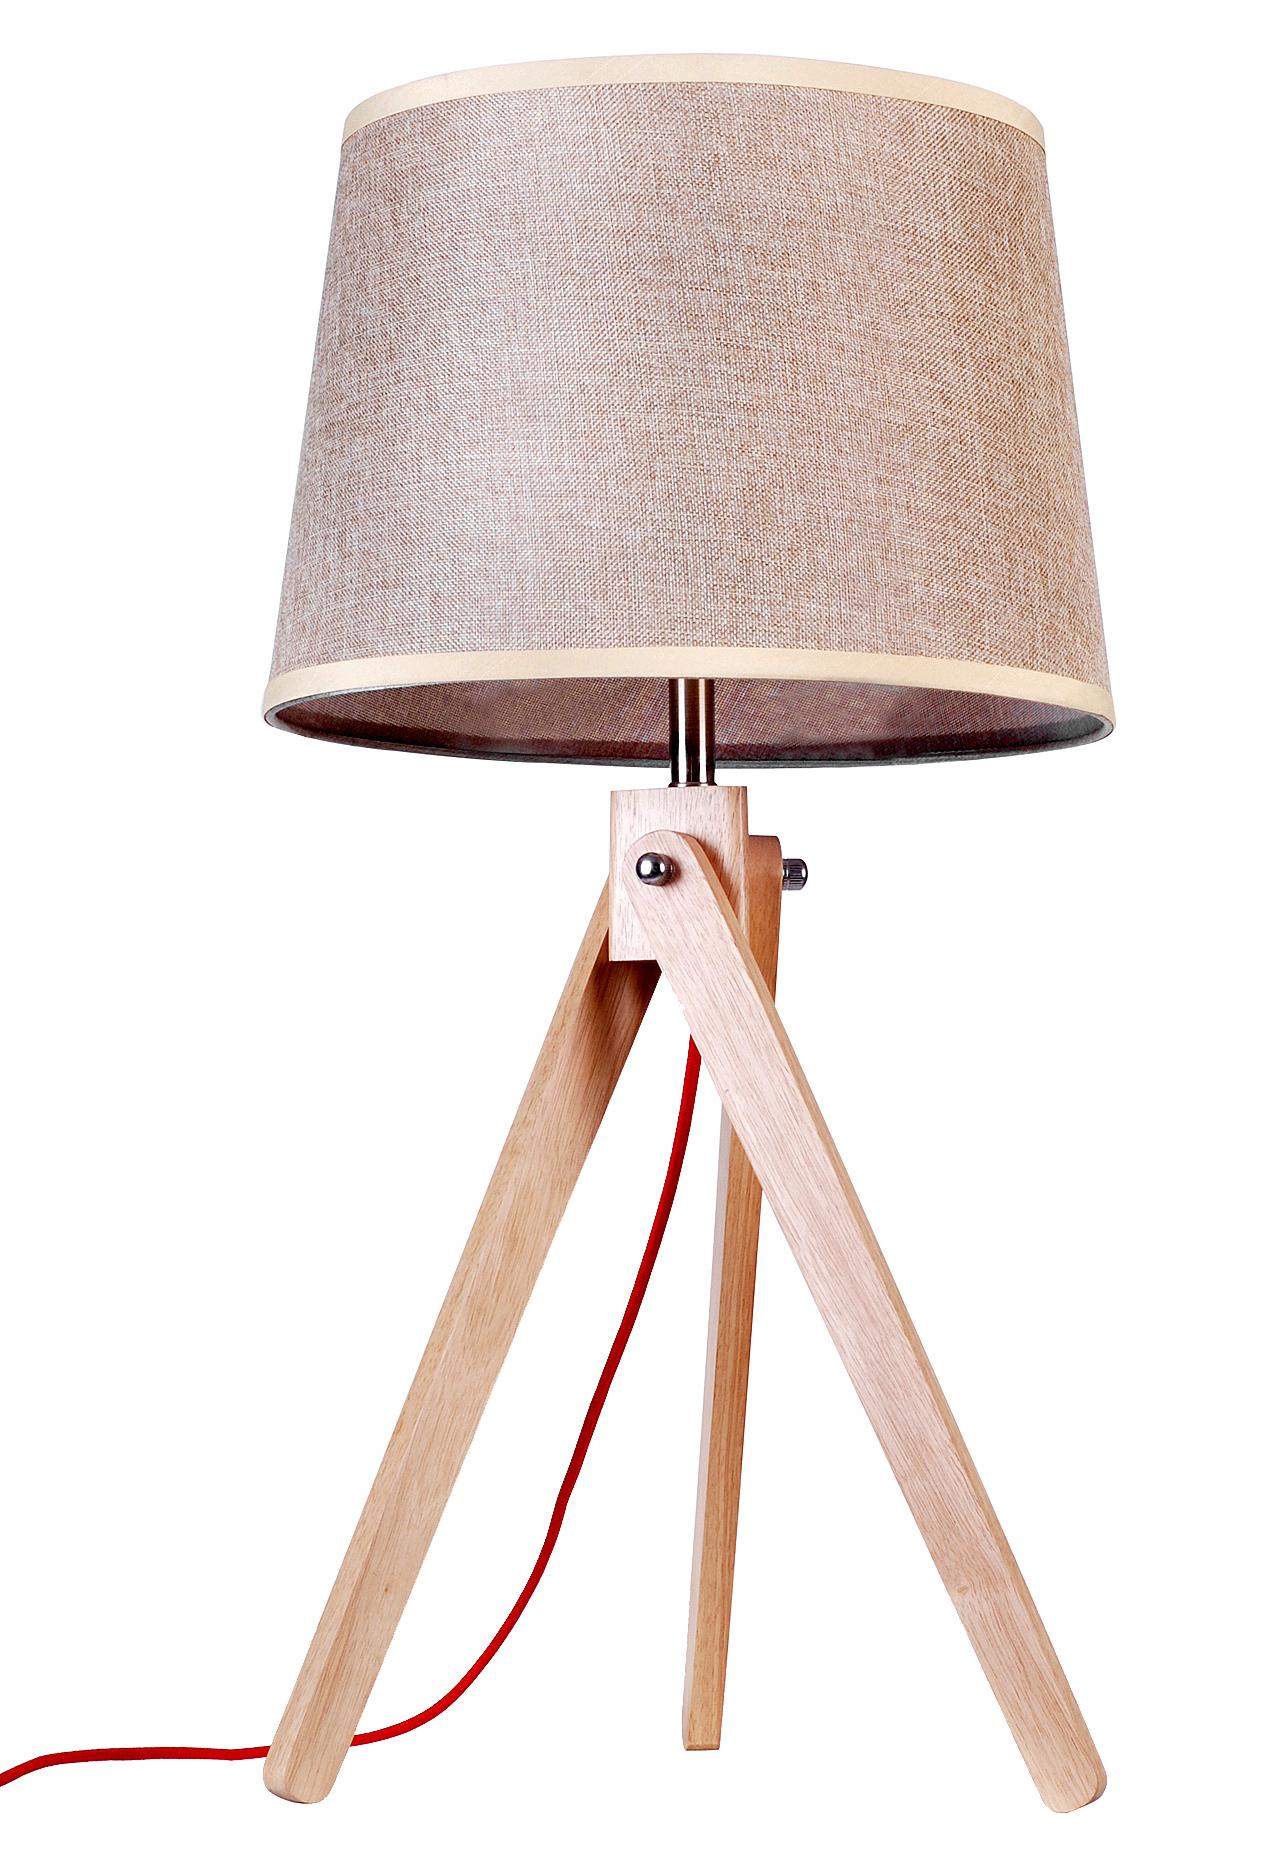 Contemporary natural wooden tripod table lamp